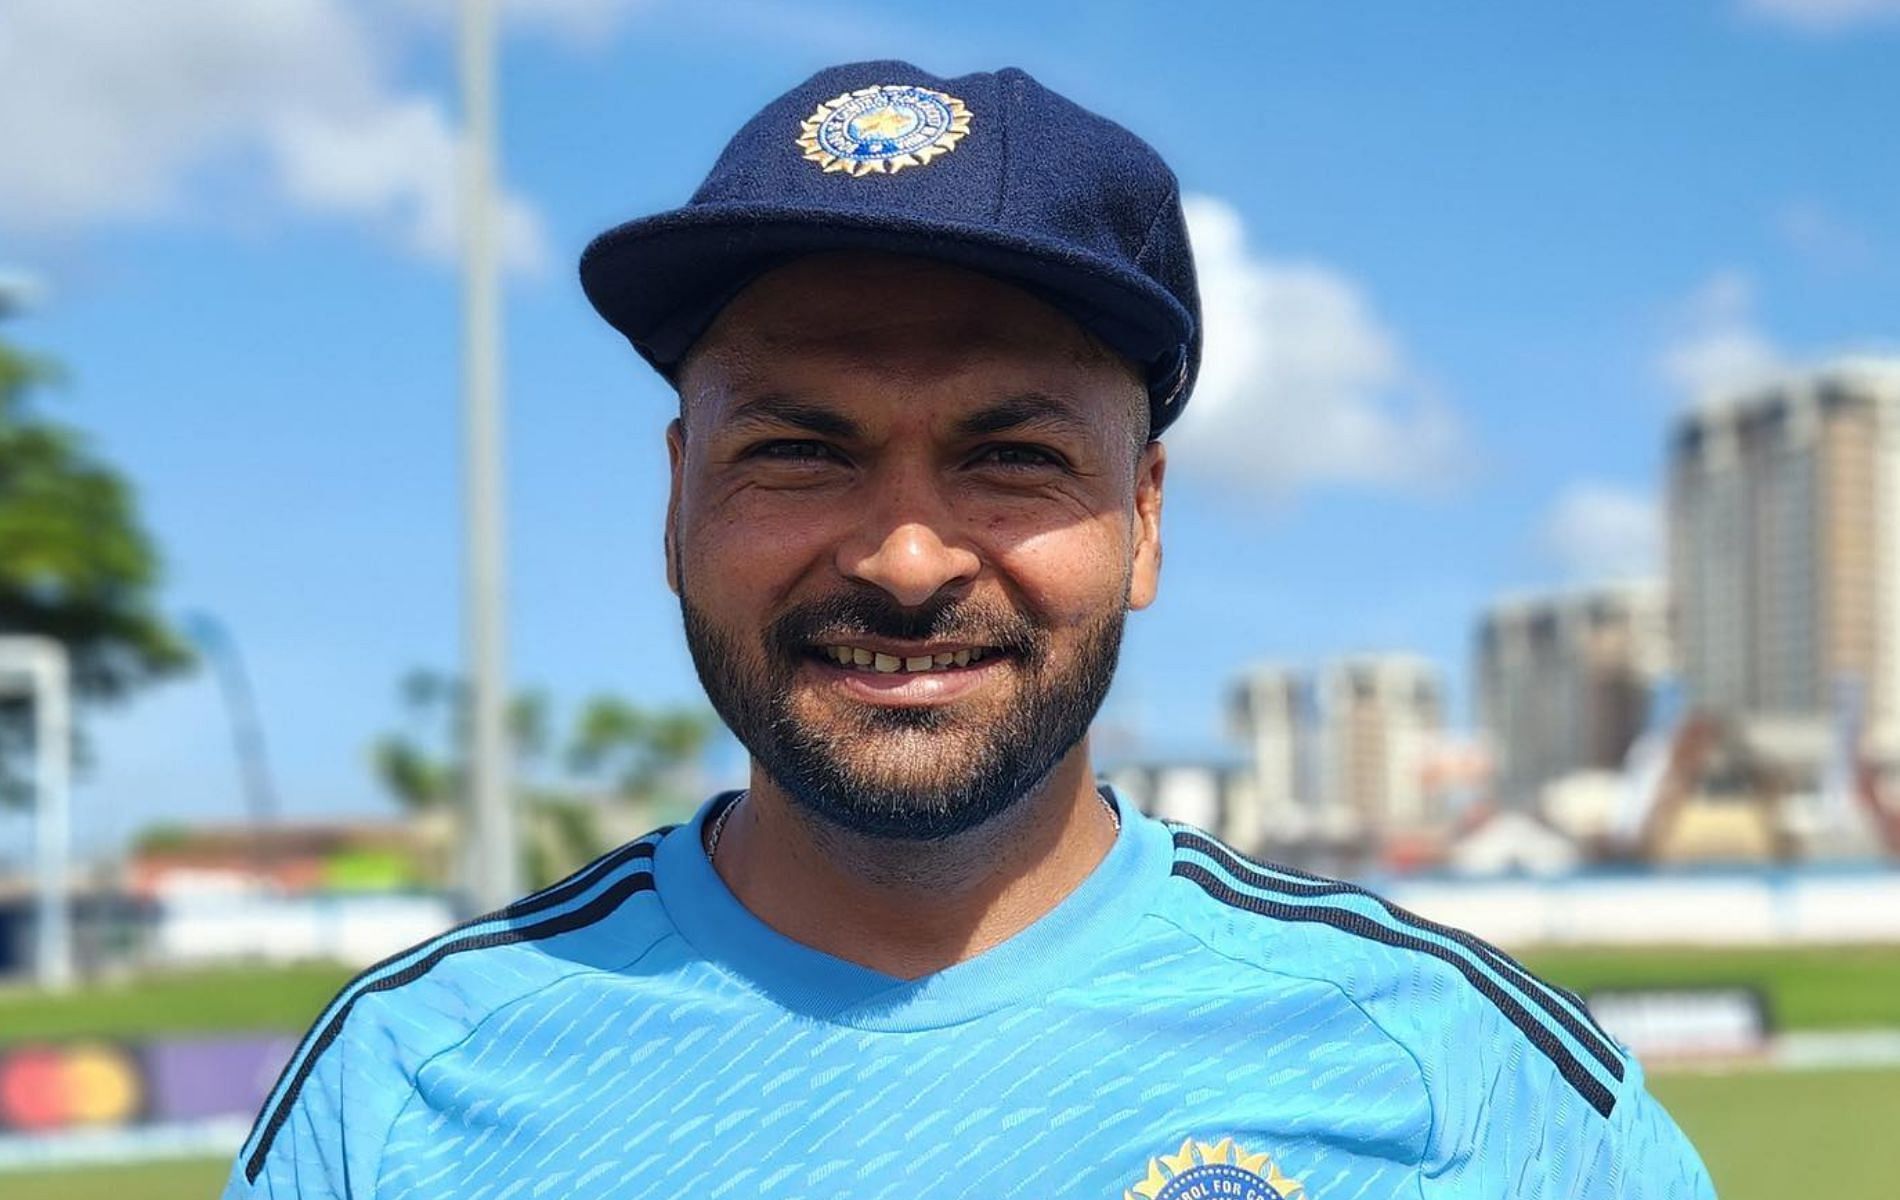 Mukesh Kumar made his Test debut at the Queen